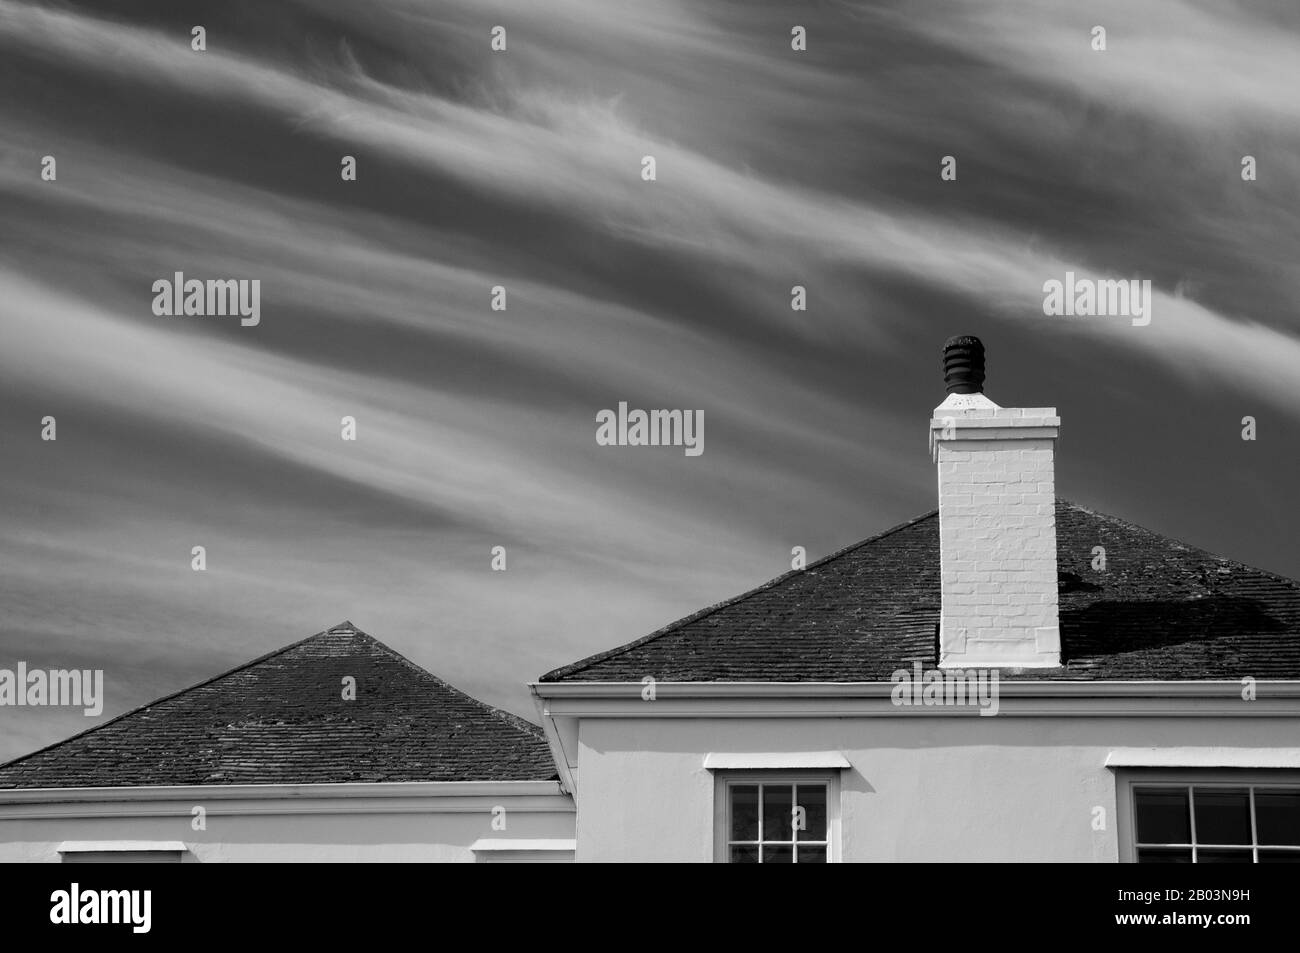 Black and white photo of tiled rooftops, chimney and summery sky with feather clouds in St ives, Cornwall, England. Stock Photo